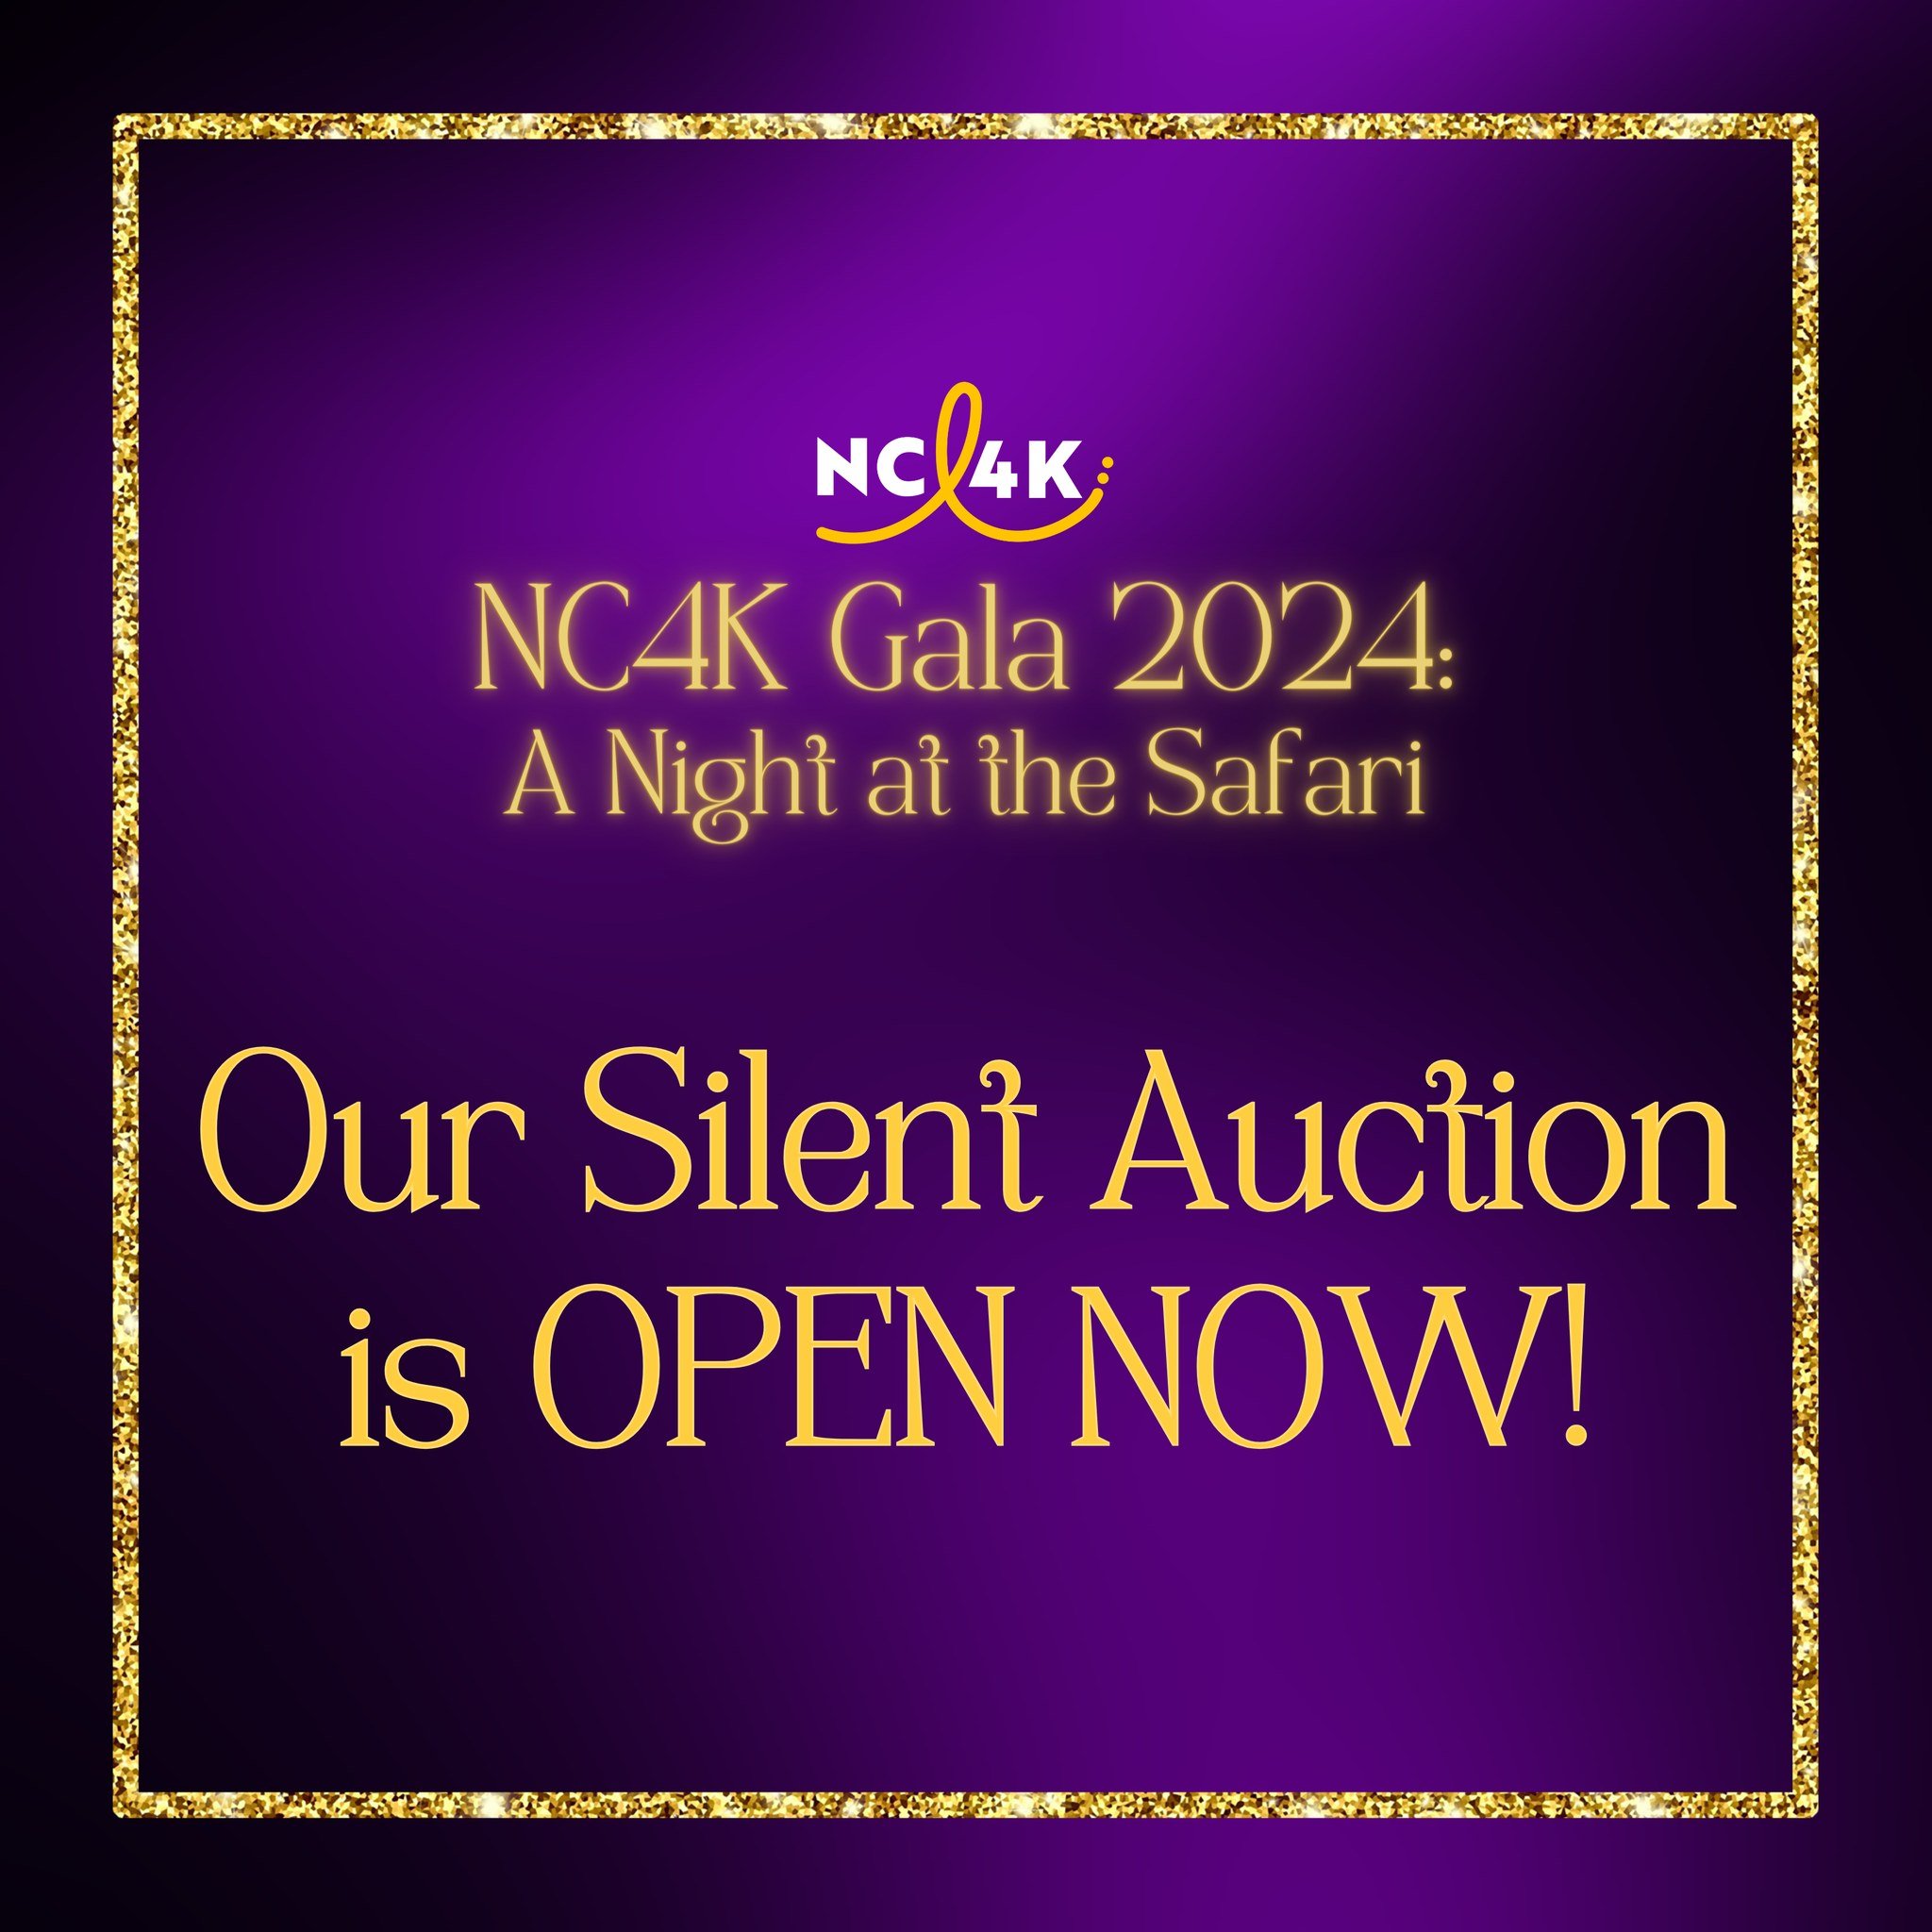 Our 2024 Gala Silent Auction is NOW OPEN! 
Anyone is eligible to bid on these incredible items. From gift cards to ticket packs to gift packages, we have over 50 items available to bid on, and all proceeds go towards NC4K's mission of supporting kids